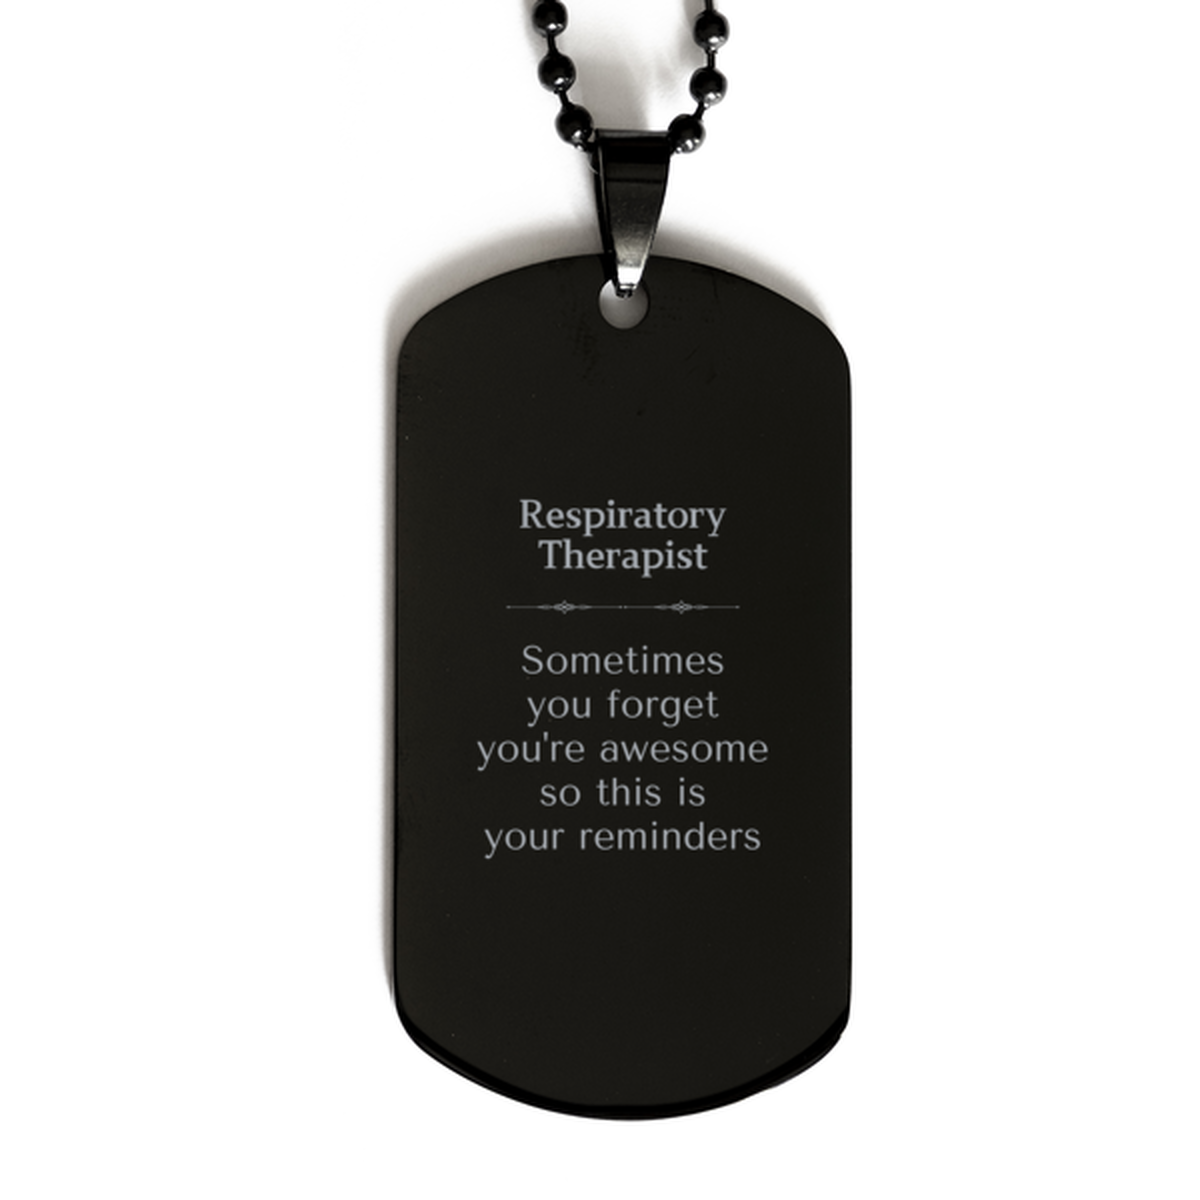 Sentimental Respiratory Therapist Black Dog Tag, Respiratory Therapist Sometimes you forget you're awesome so this is your reminders, Graduation Christmas Birthday Gifts for Respiratory Therapist, Men, Women, Coworkers